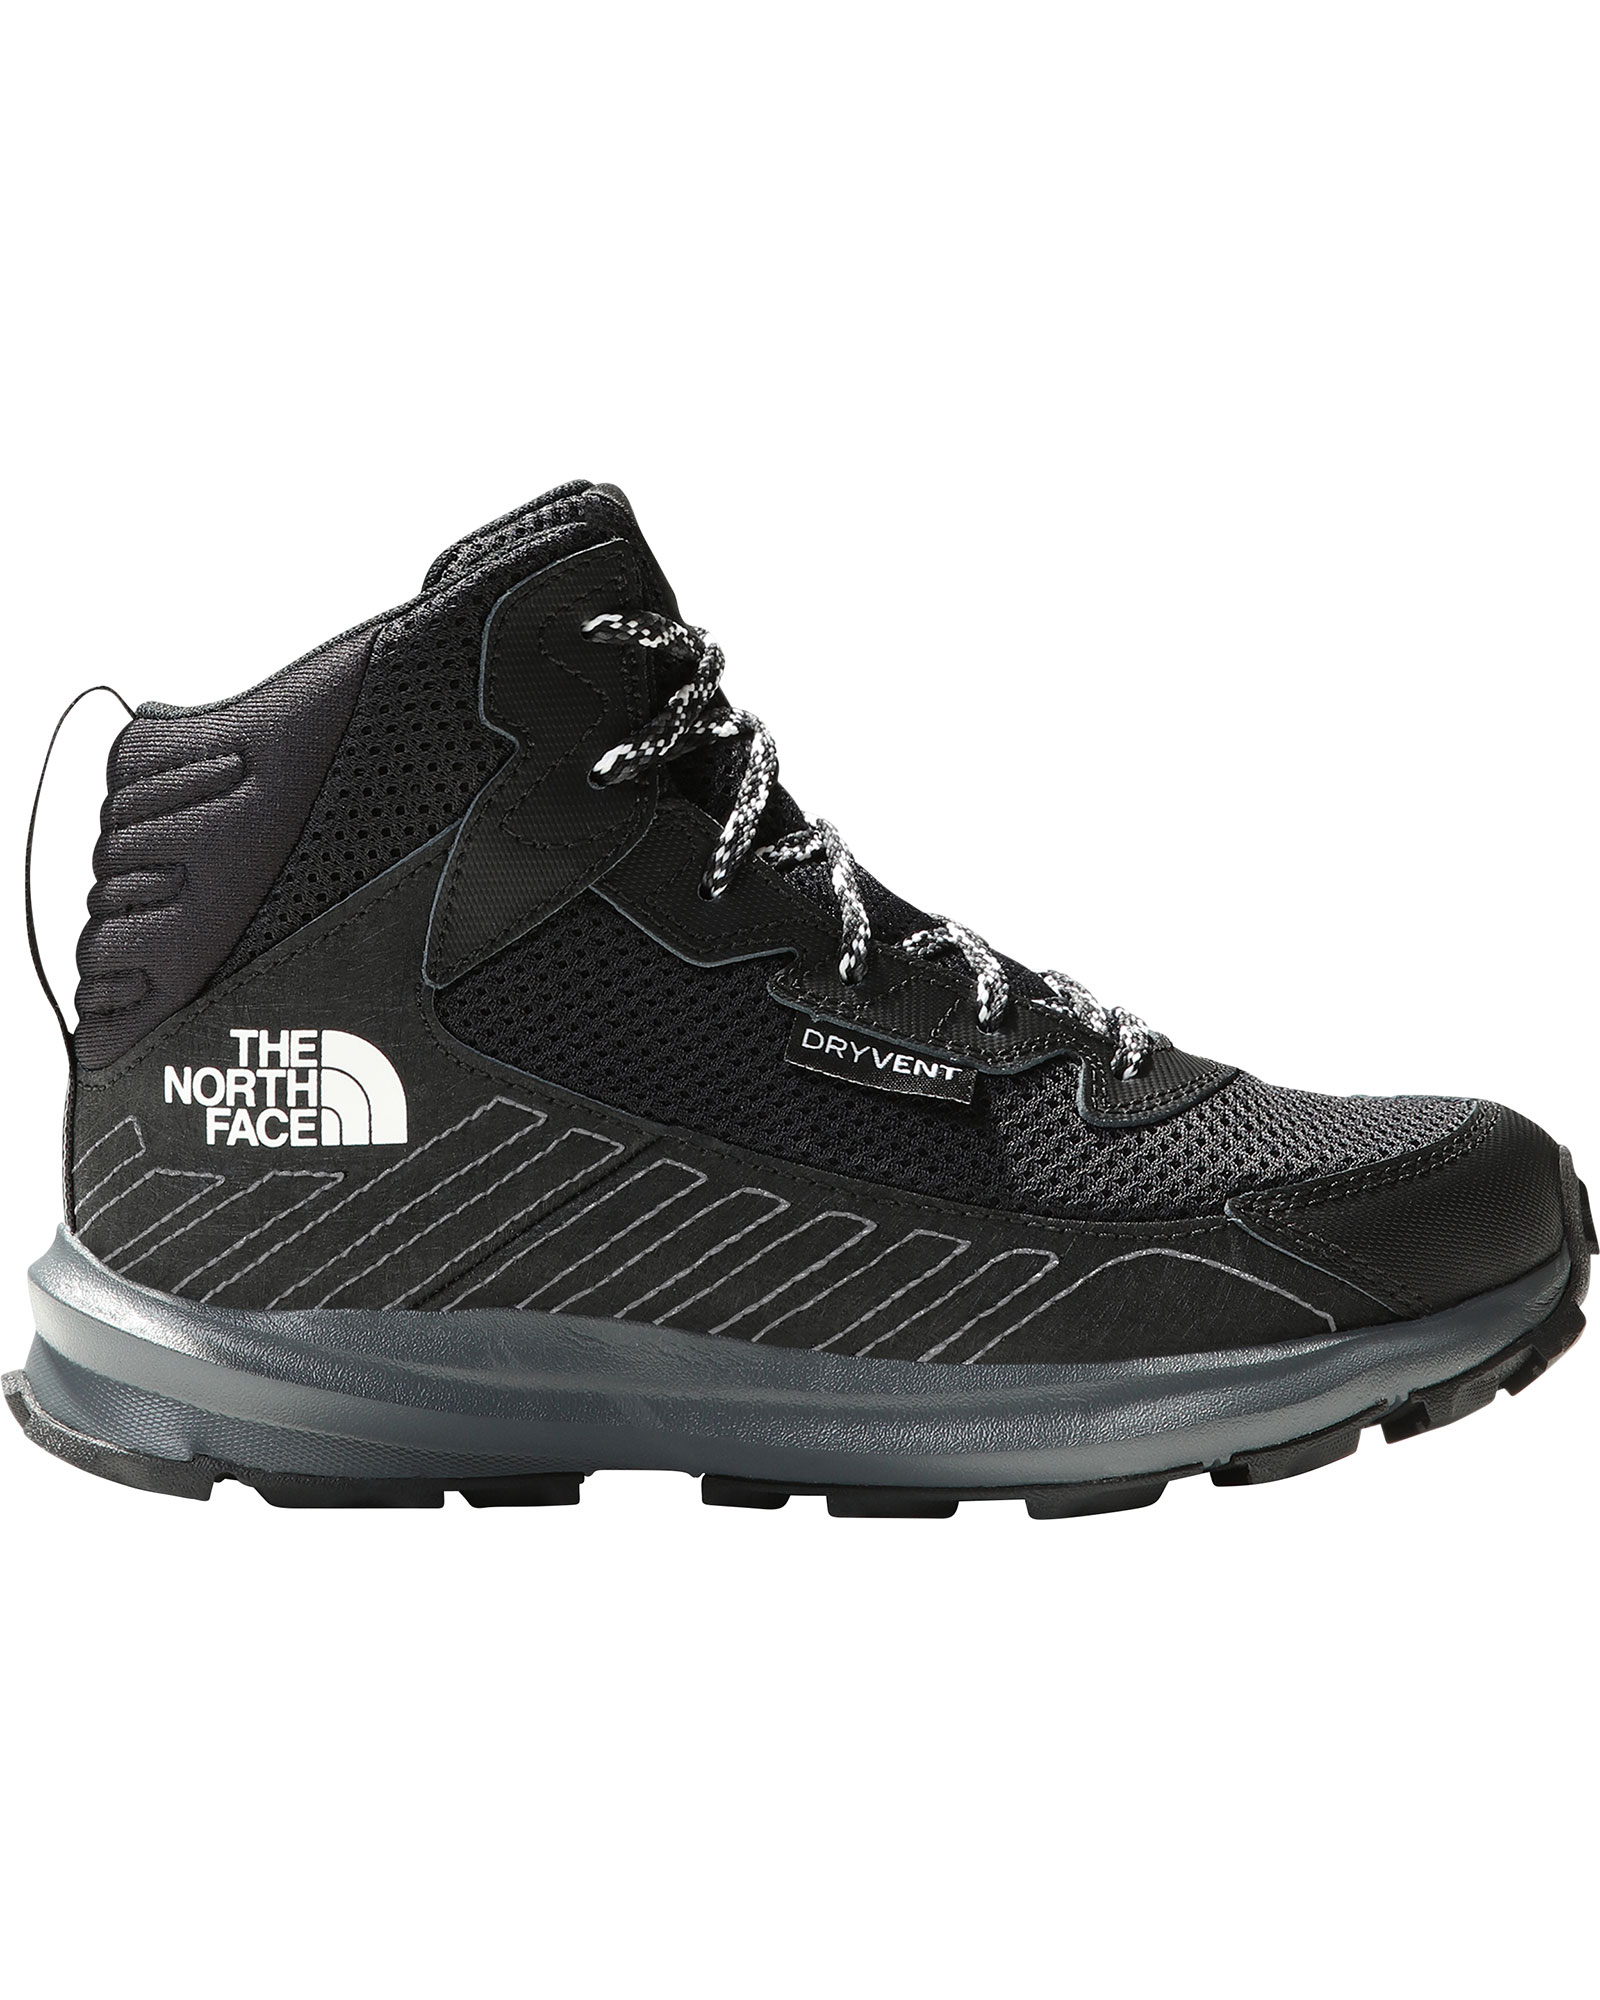 The North Face Youth Fastpack Hiker Mid Kids’ Waterproof Boots - TNF Black/TNF Black UK 13 INF